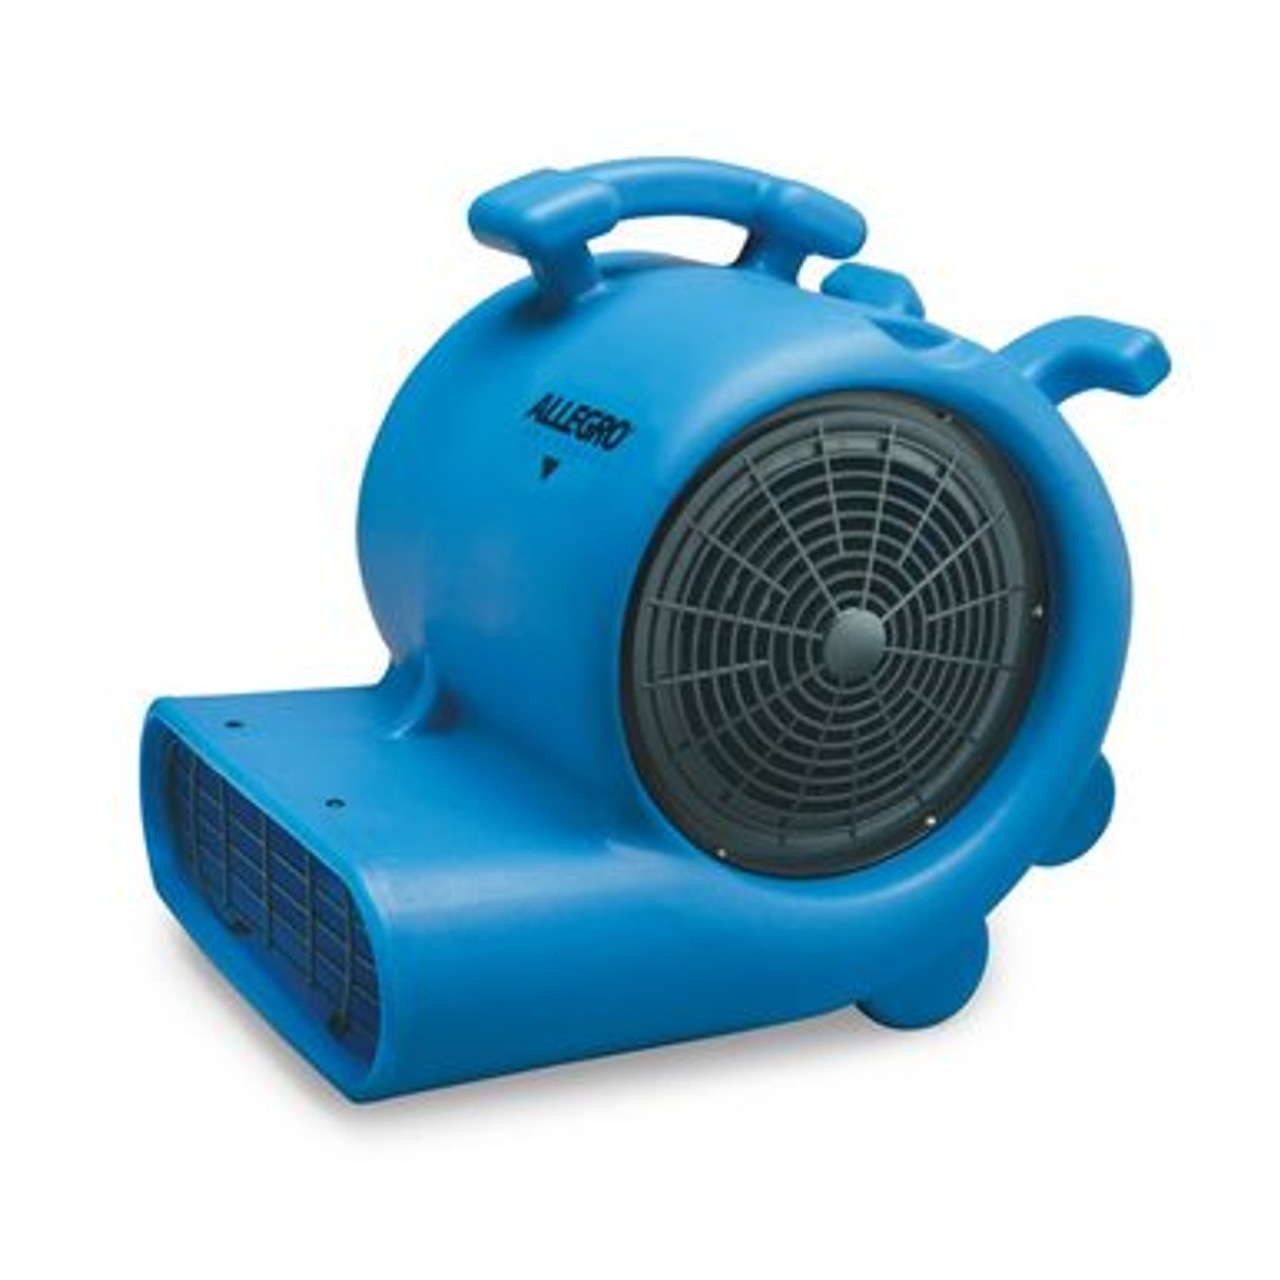 INTBUYING 3-Speed Air Mover Blower Fan Carpet Dryer 1.2HP Heavy Duty  Powerful Max Flow 5700 CFM Air Mover Blower Floor Fan Blue 220V